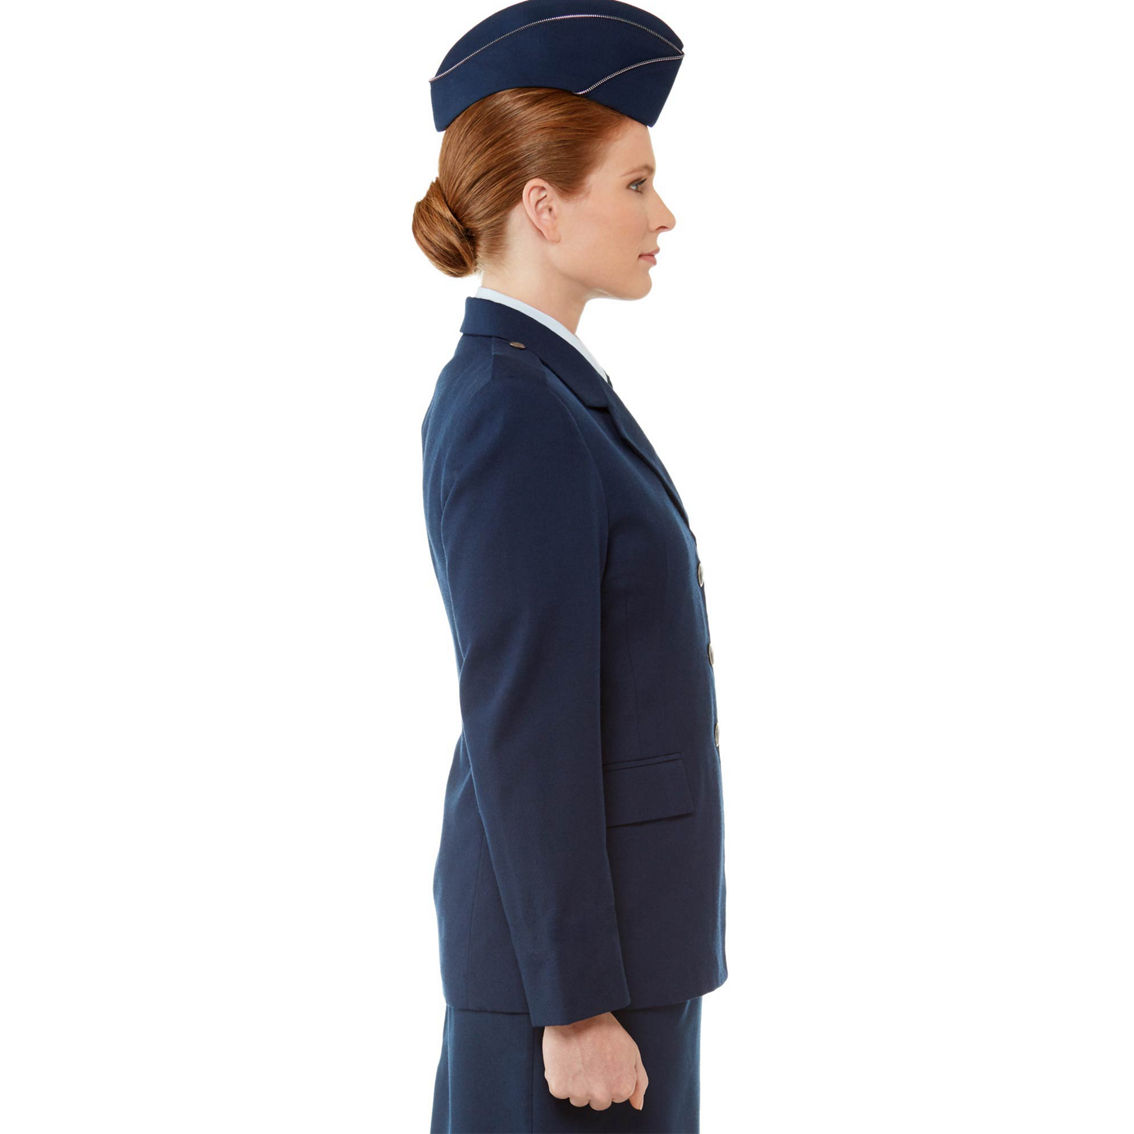 Air Force Women's Officer Service Dress Coat - Image 3 of 4